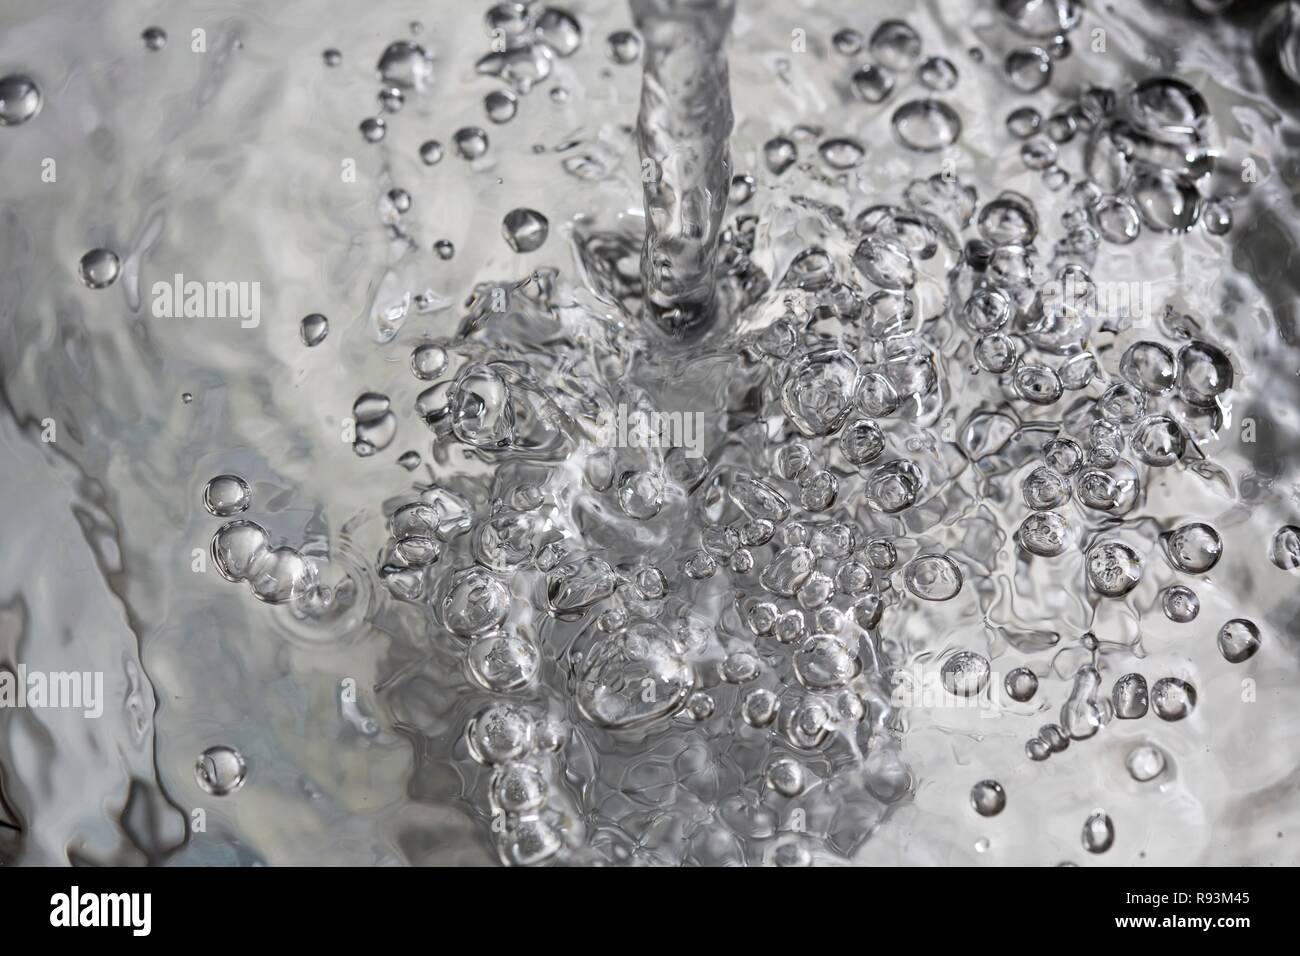 Water flowing into a basin, symbolic image for water consumption, wasting water Stock Photo